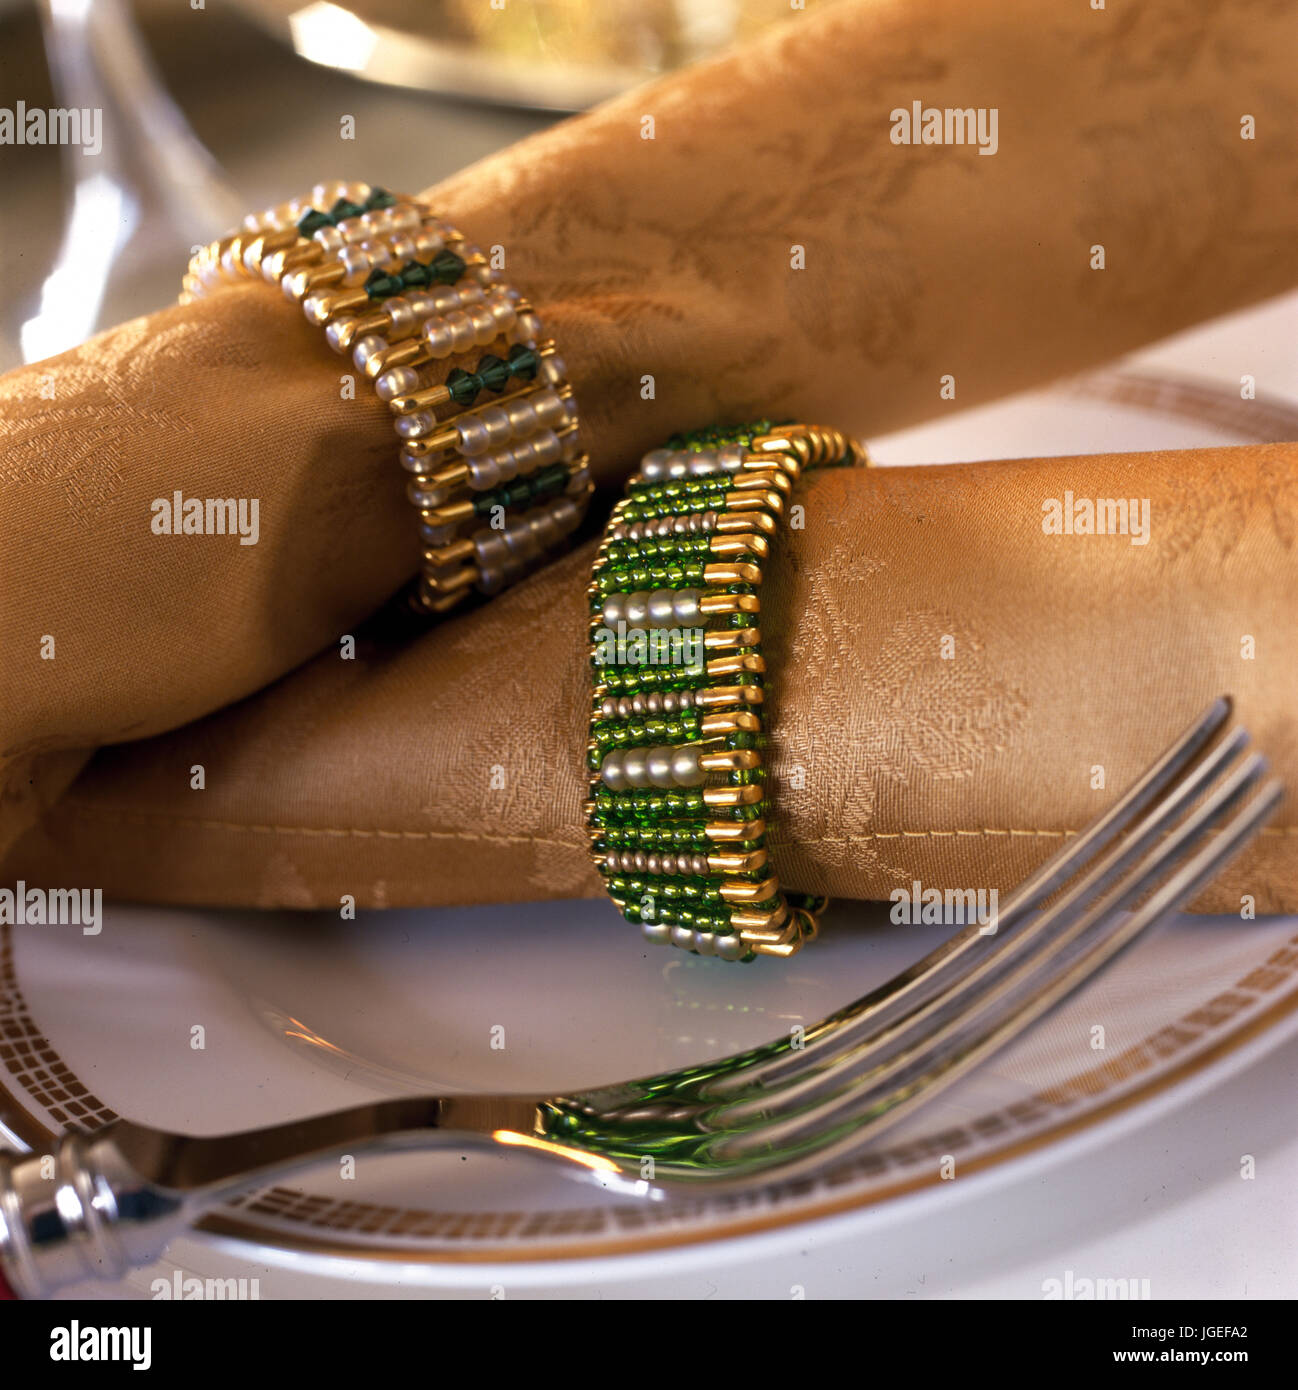 Beaded bracelets used as serviette or napkin rights Stock Photo